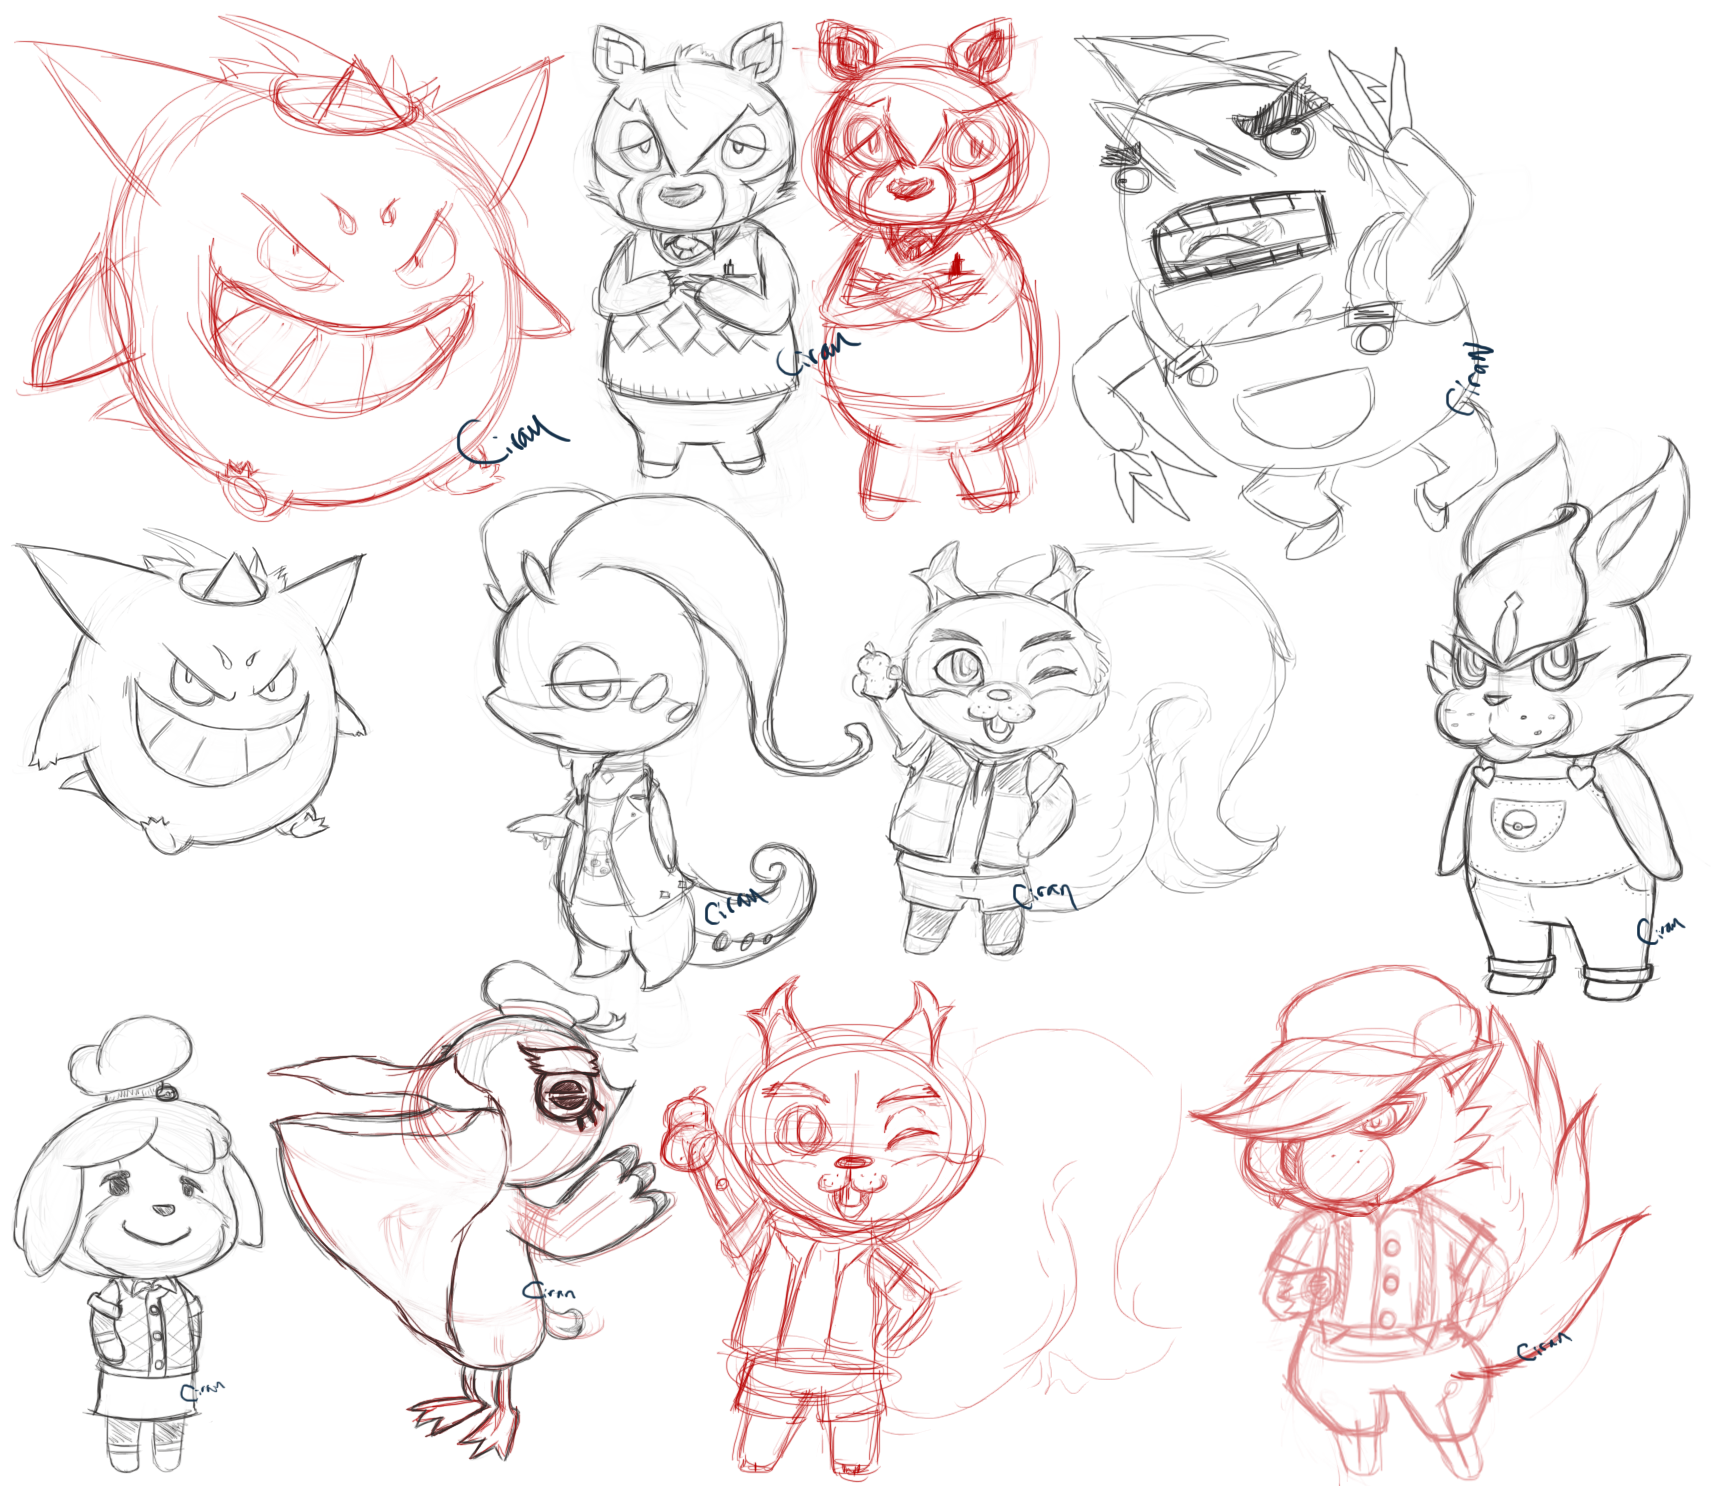 AnimalCrossing_sketches.png